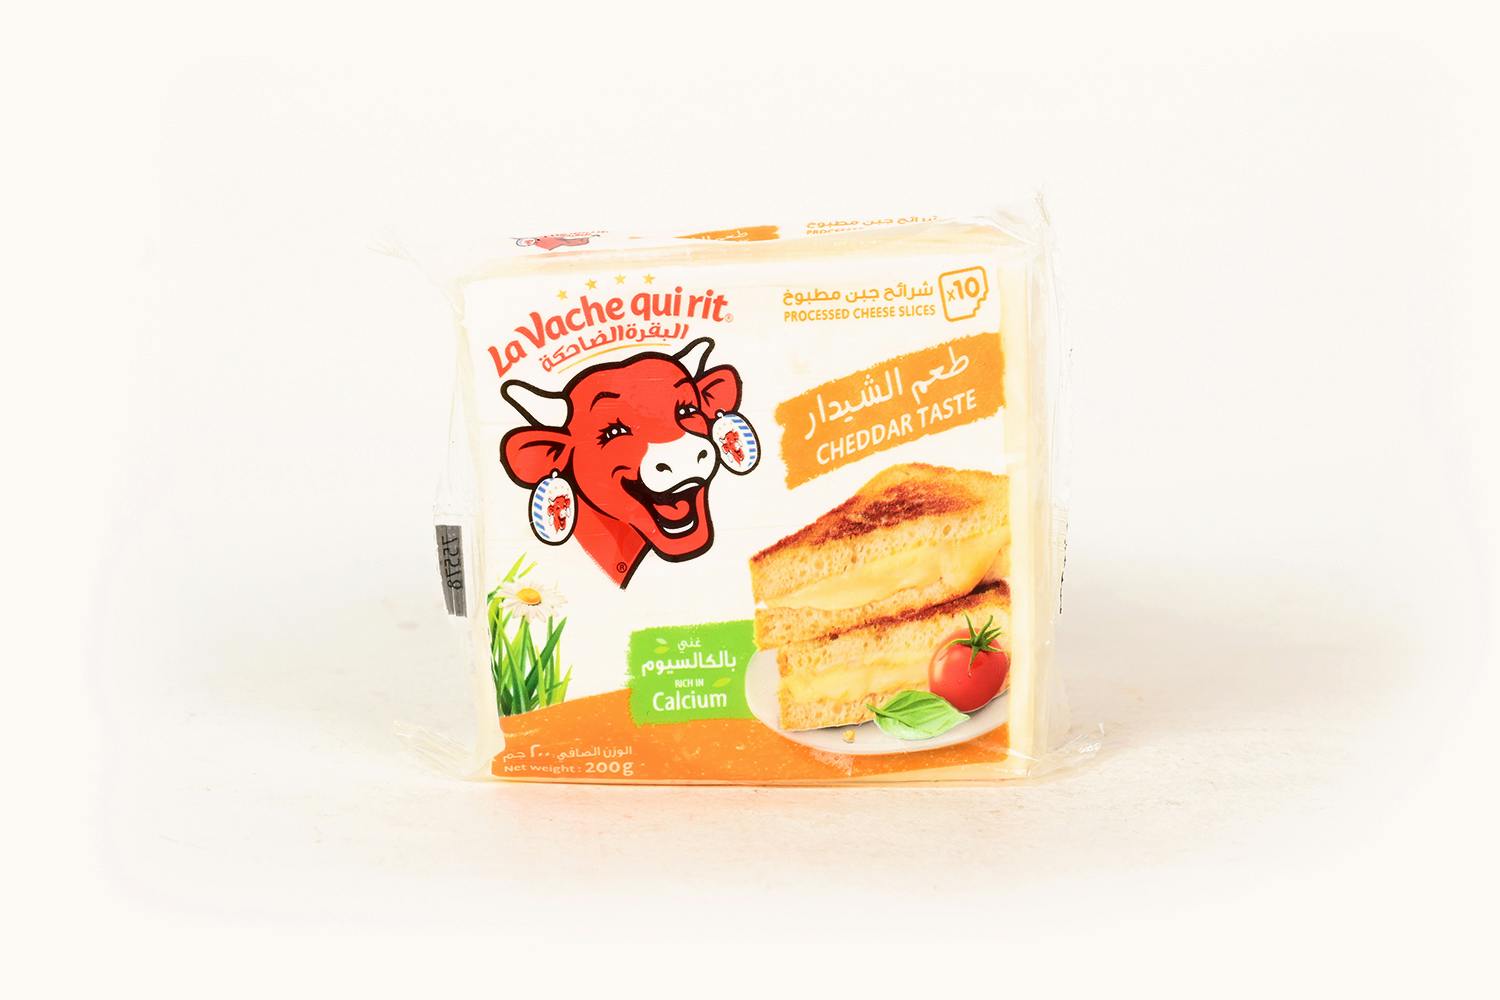 The Laughing Cow Cheddar Cheese Slices